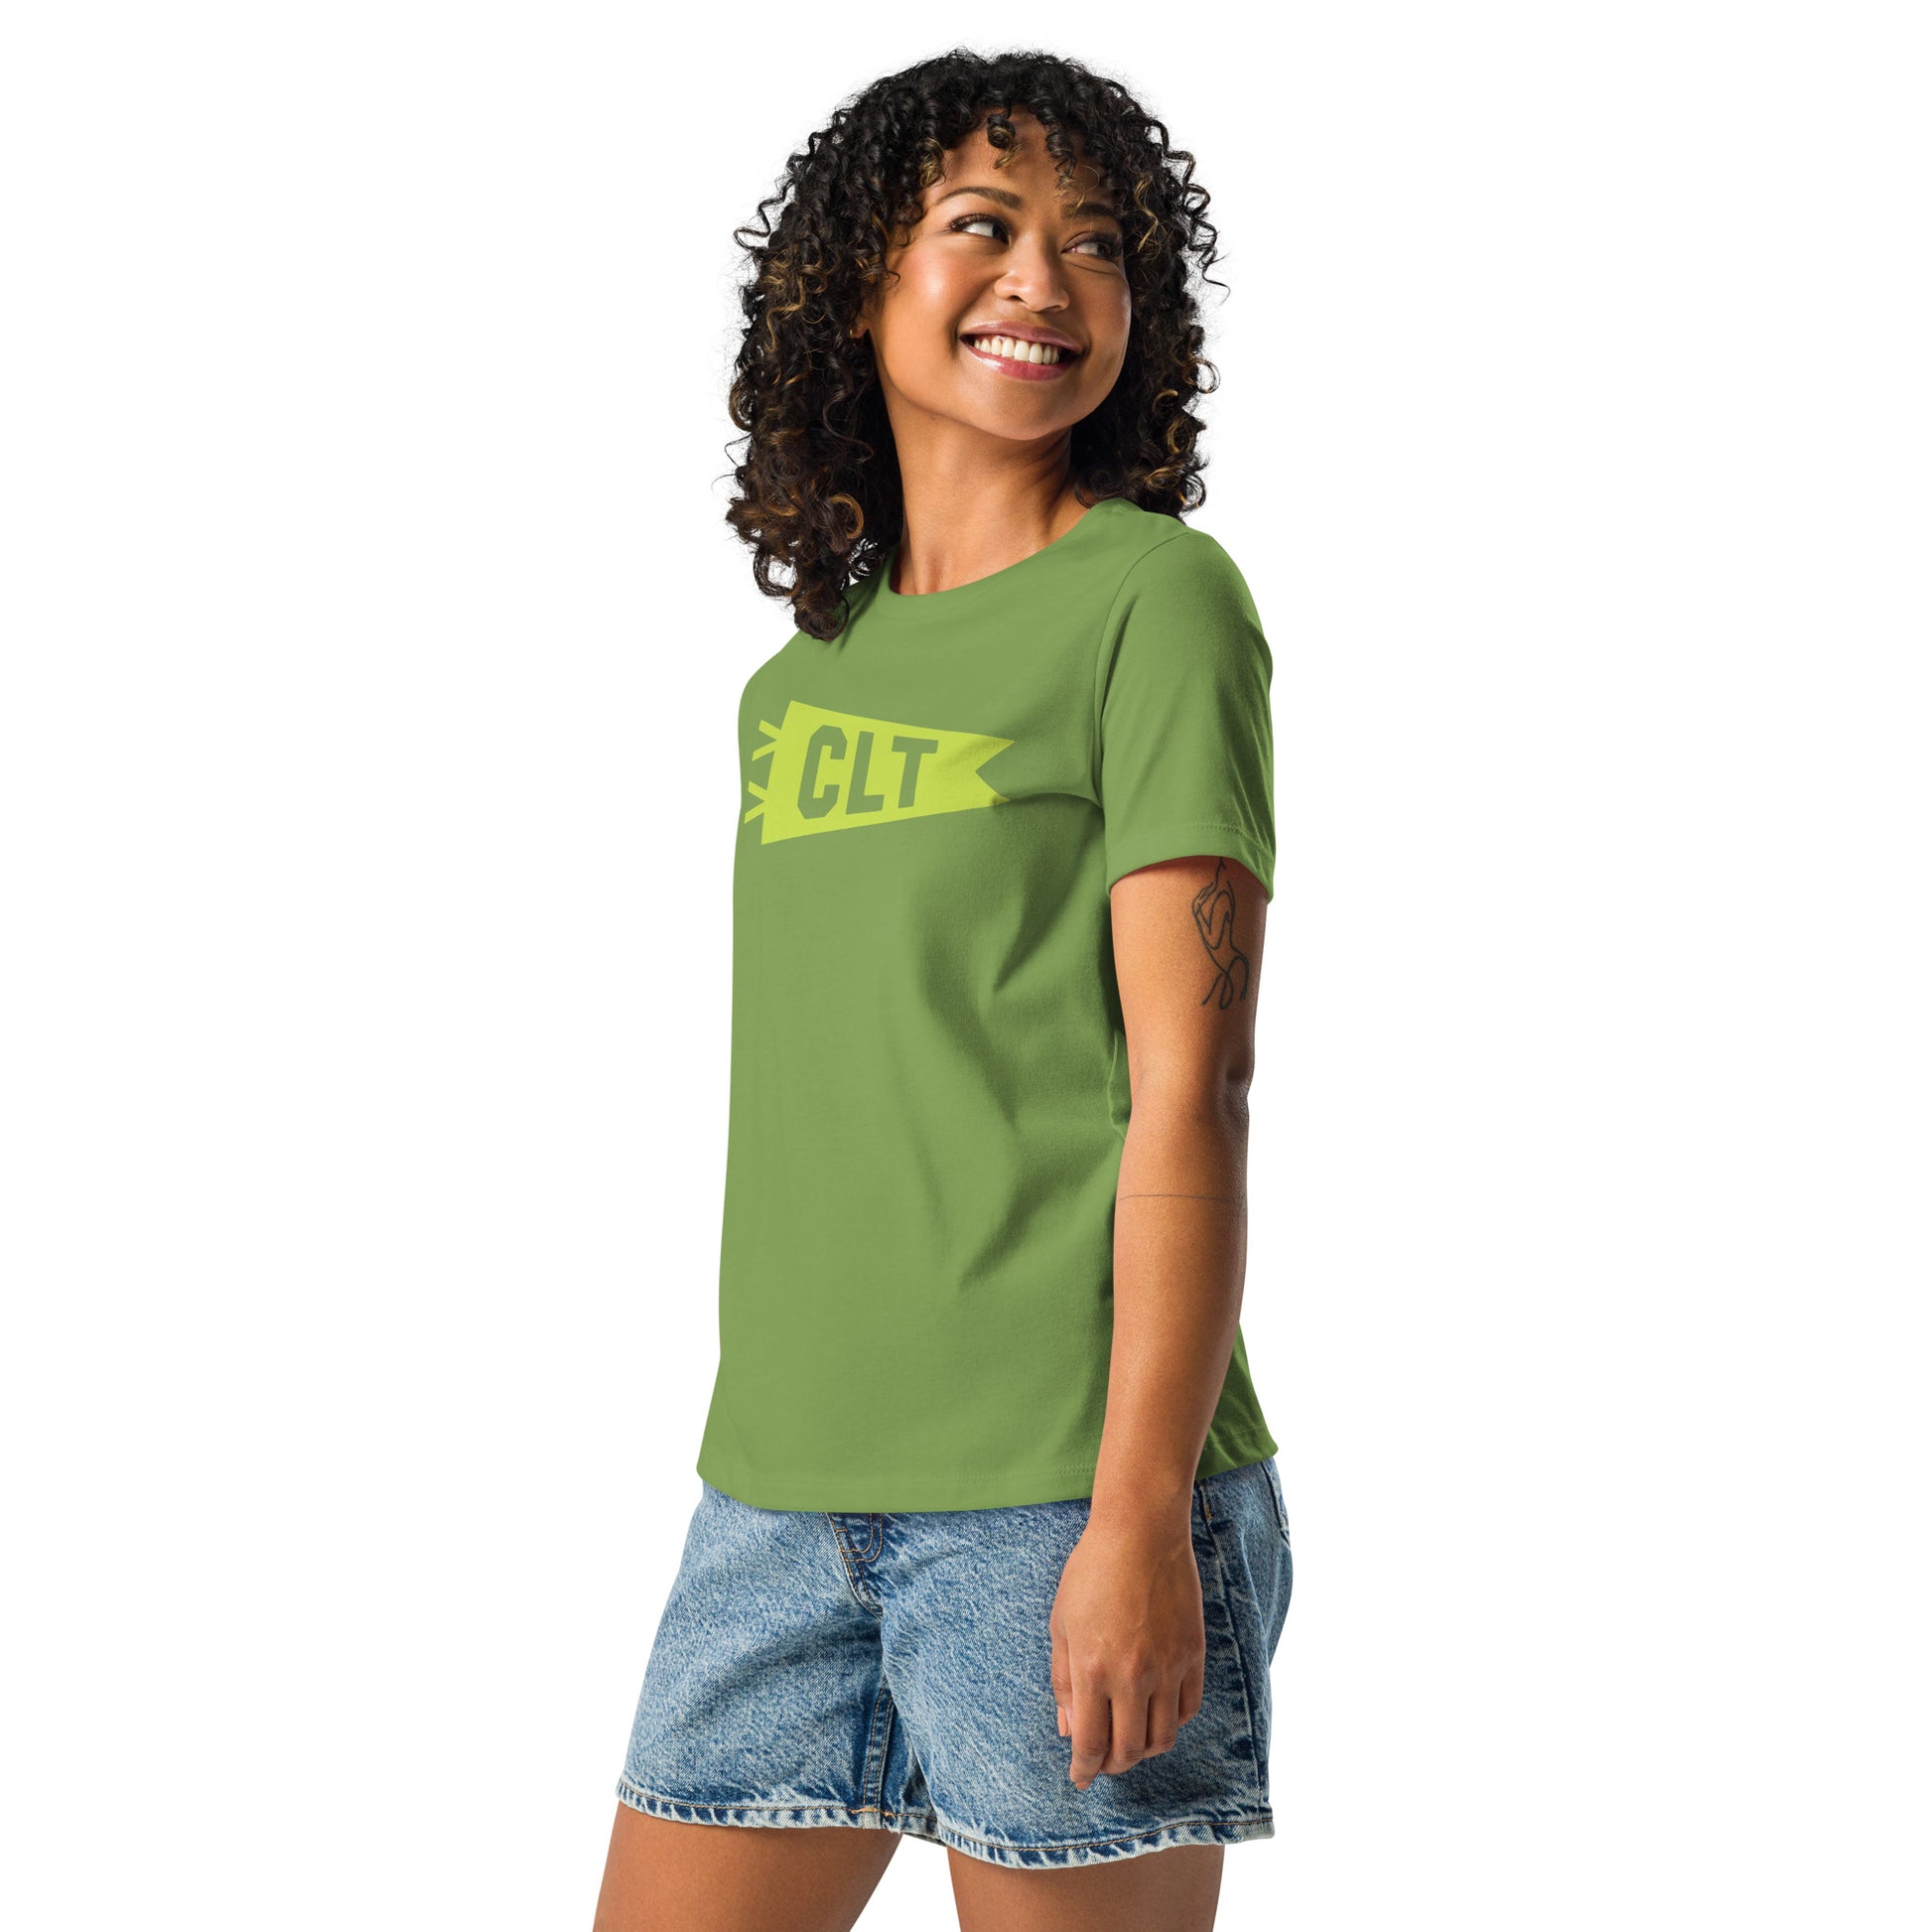 Airport Code Women's Tee - Green Graphic • CLT Charlotte • YHM Designs - Image 06